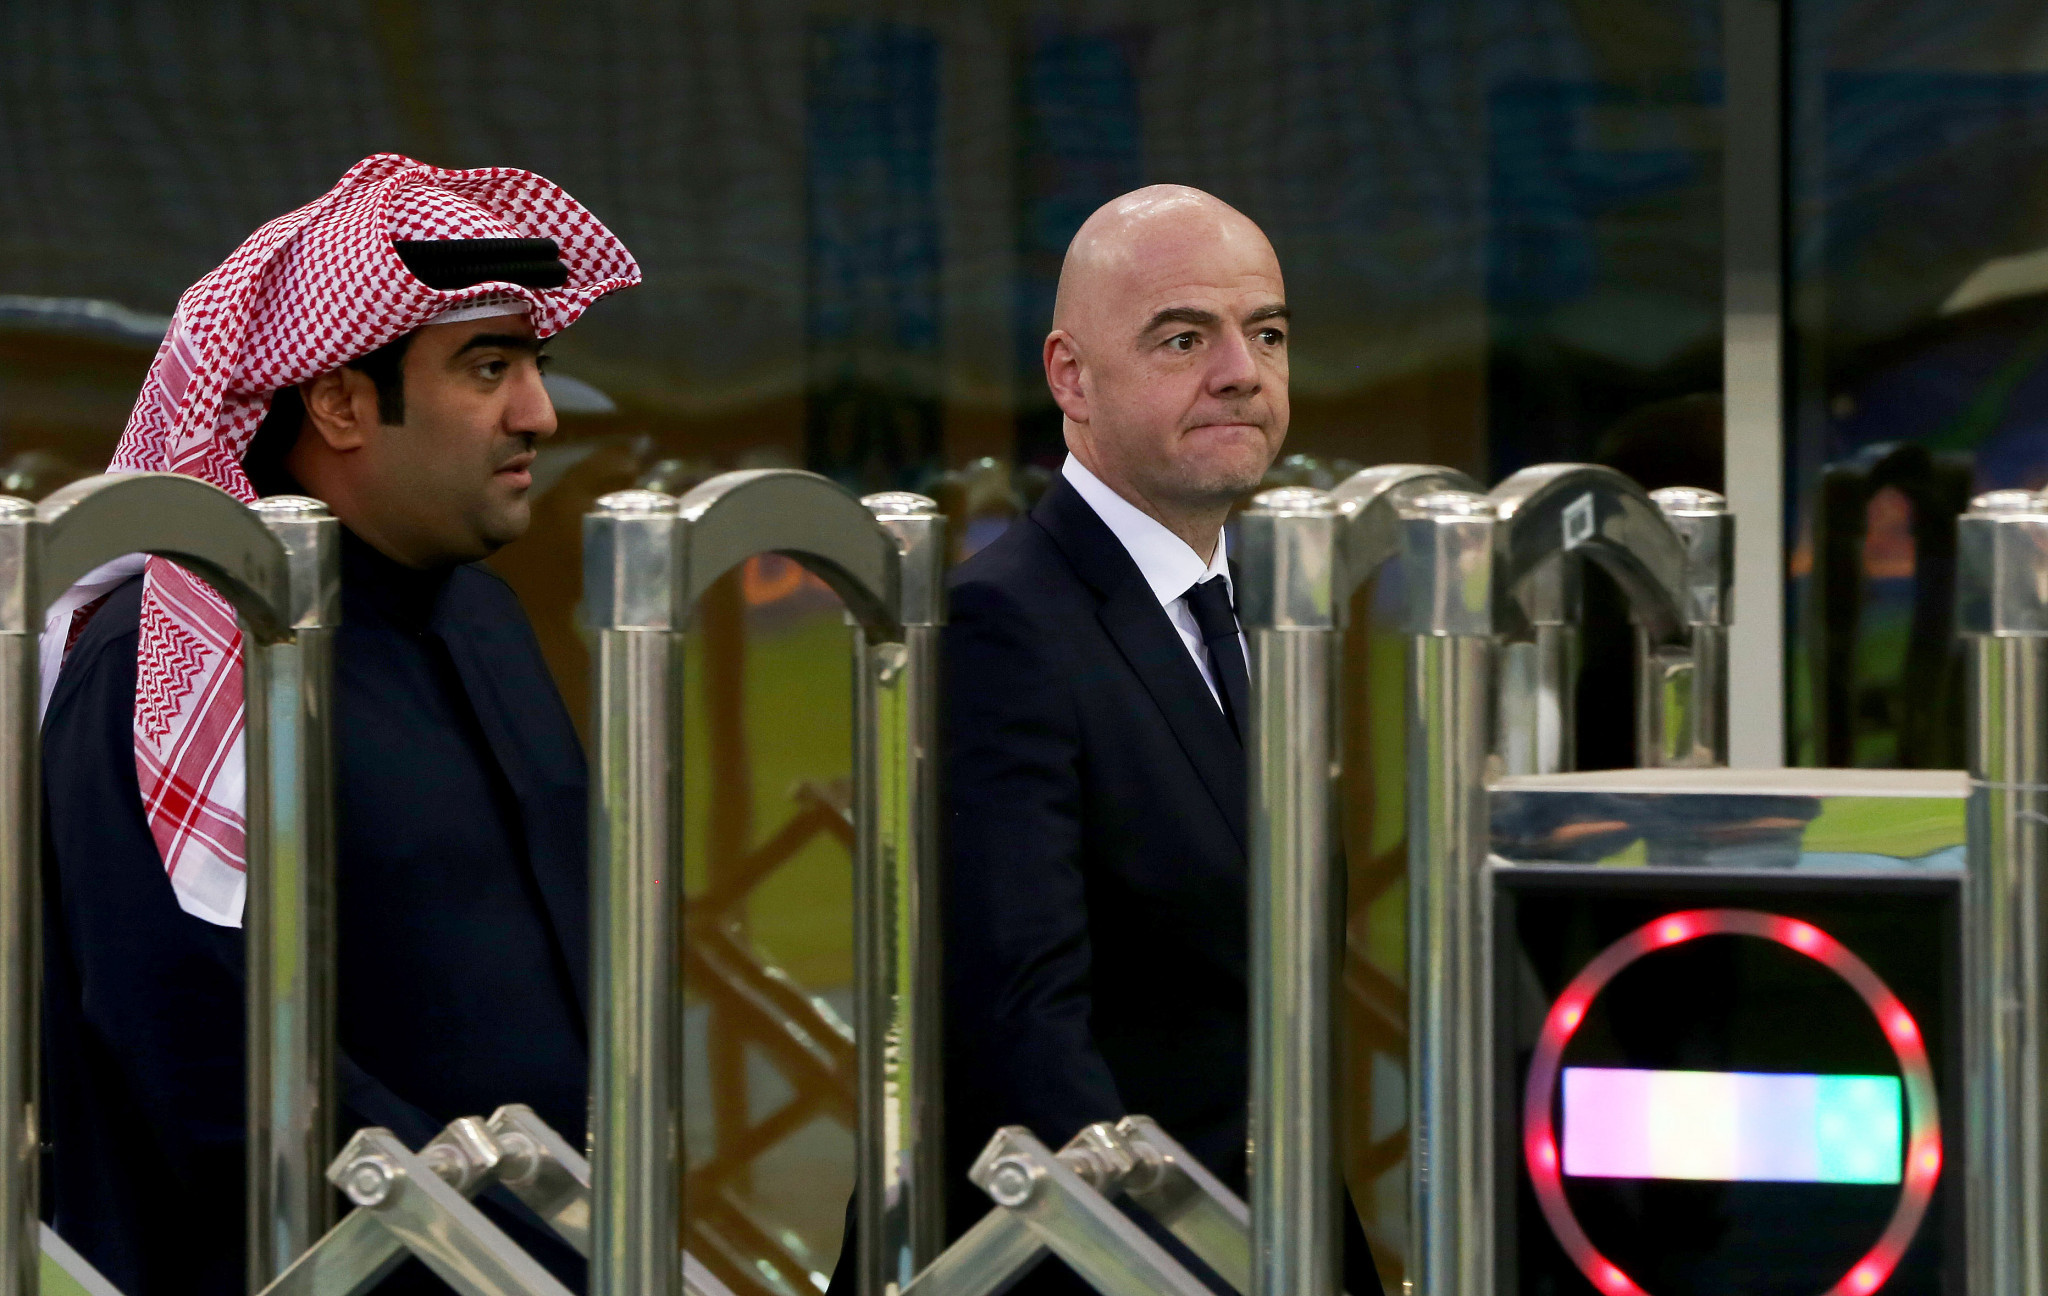 FIFA President Gianni Infantino praised the decision to switch the tournament from Qatar to Kuwait ©Getty Images